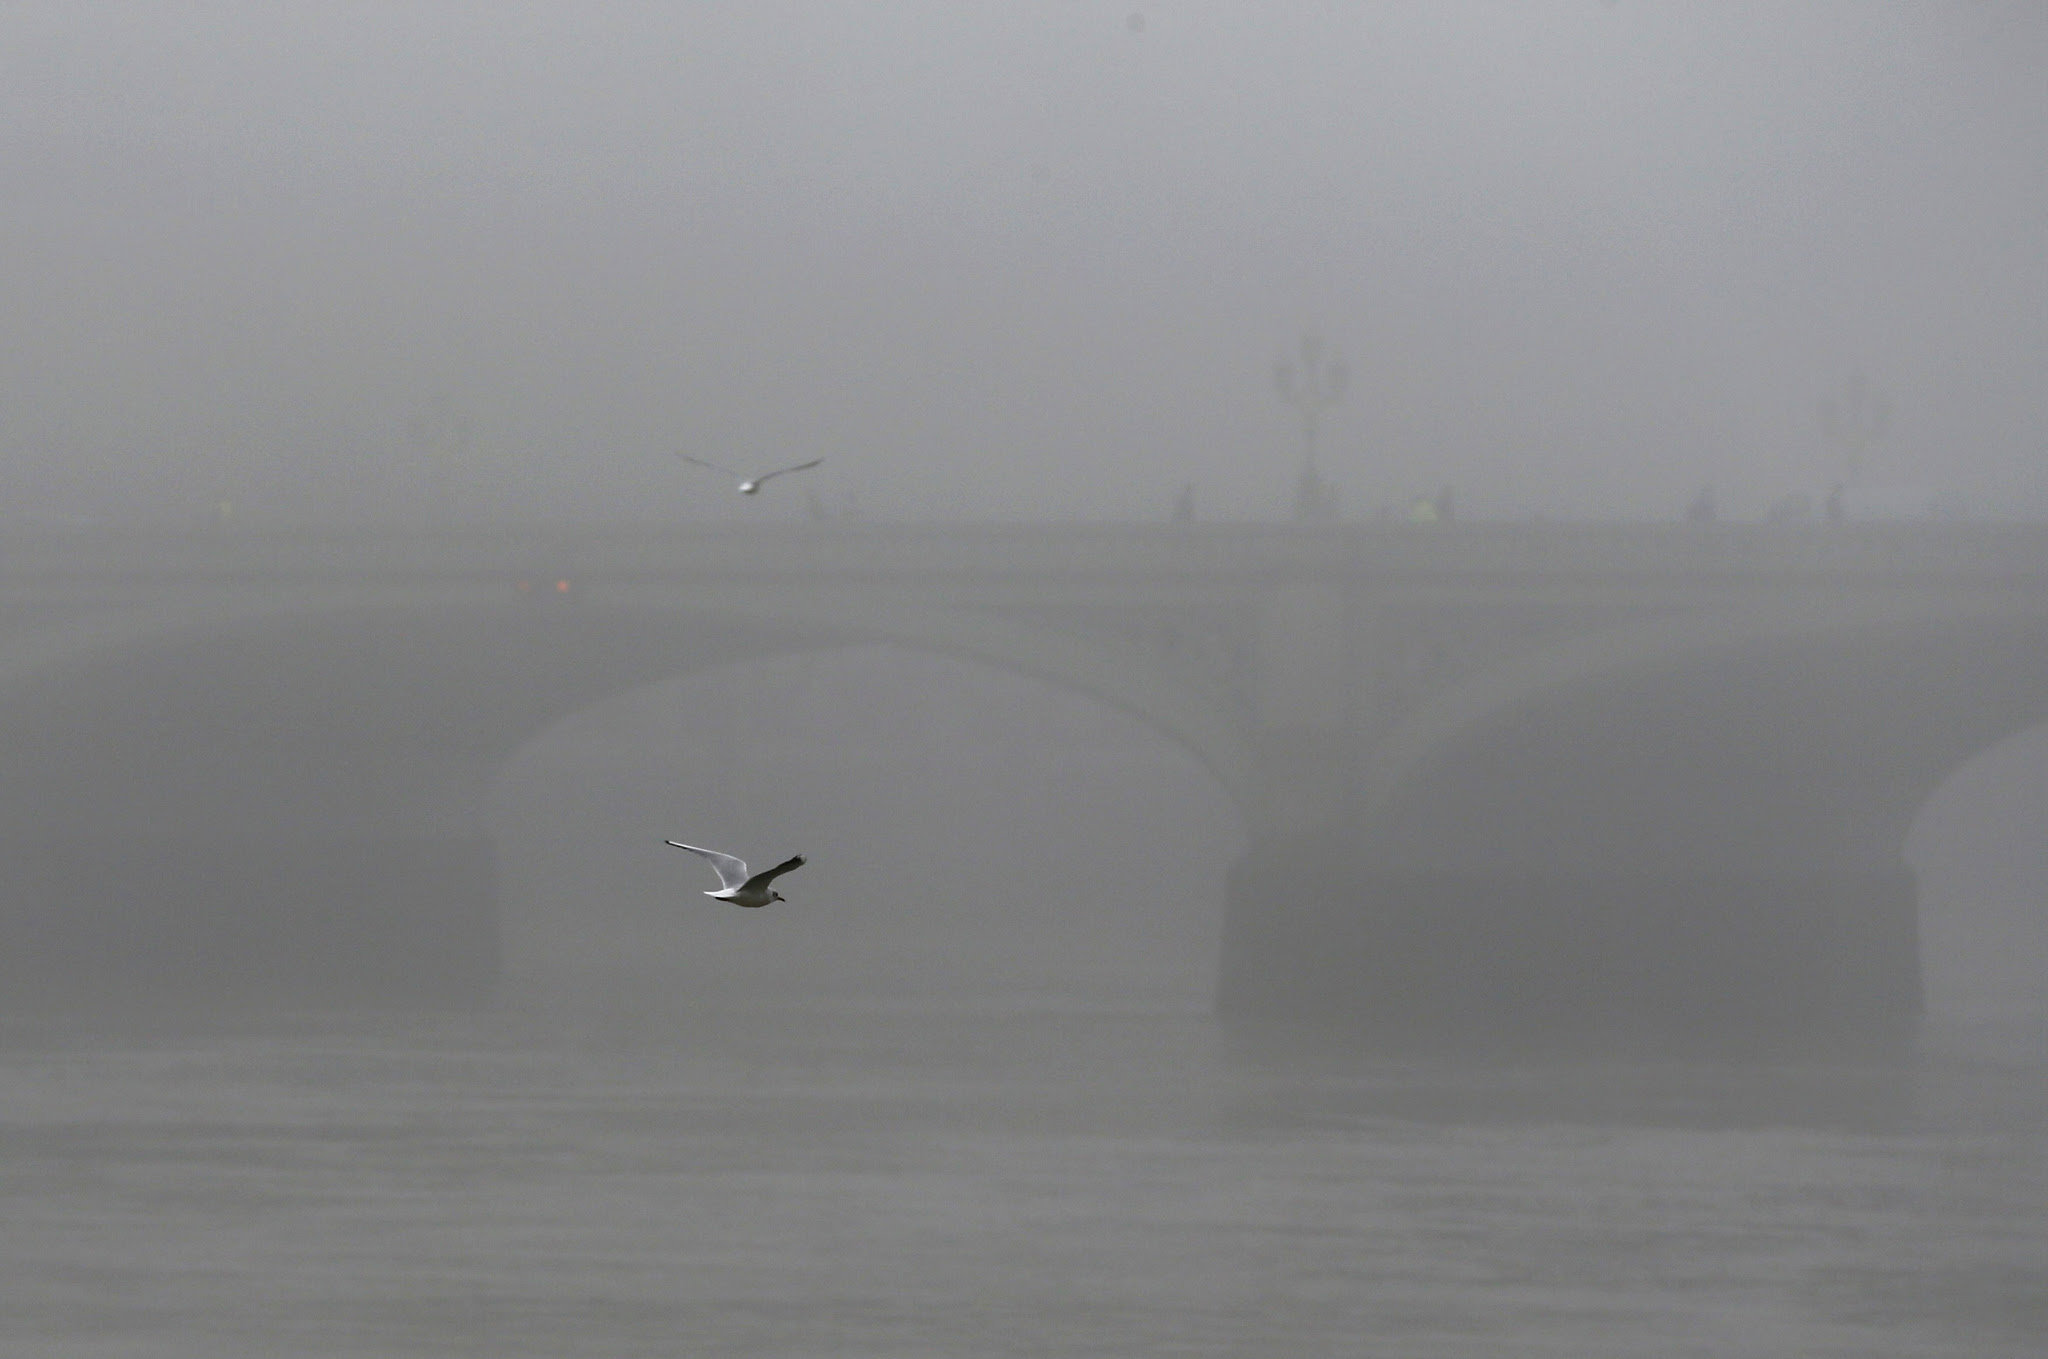 A seagull flies past Westminster Bridge during a foggy day in central London, November 2, 2015. Airports across Britain suffered disruption on Monday as heavy fog led to delays and cancellations for a second day. Flights to and from London airports were being affected, while foggy conditions in the capital and across Europe were causing problems to airports around the country.REUTERS/Stefan Wermuth